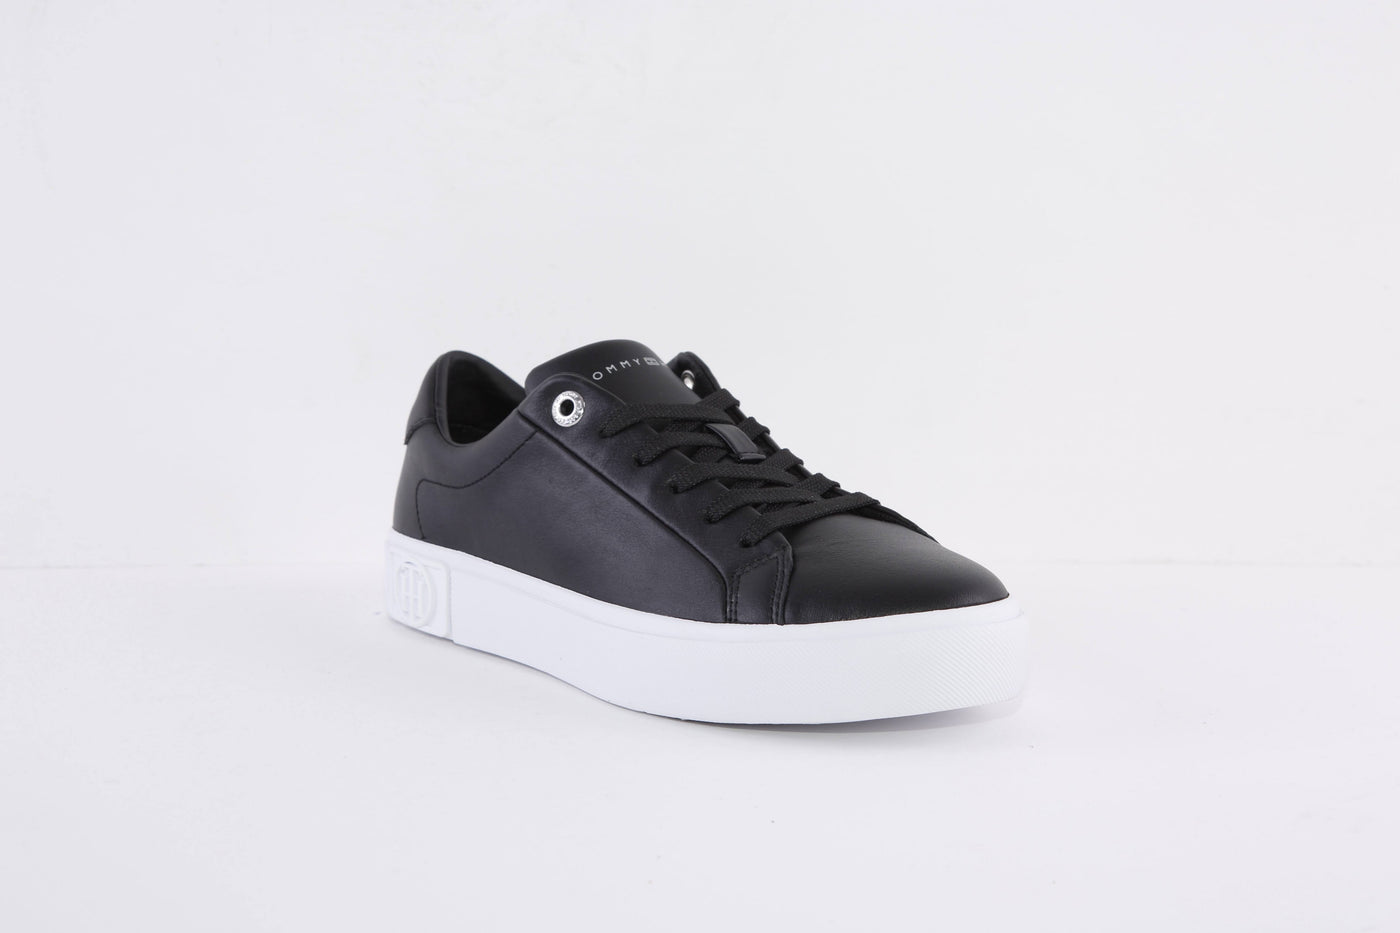 TOMMY HILFIGER - TH BRANDED FOXING LACED TRAINER - BLACK